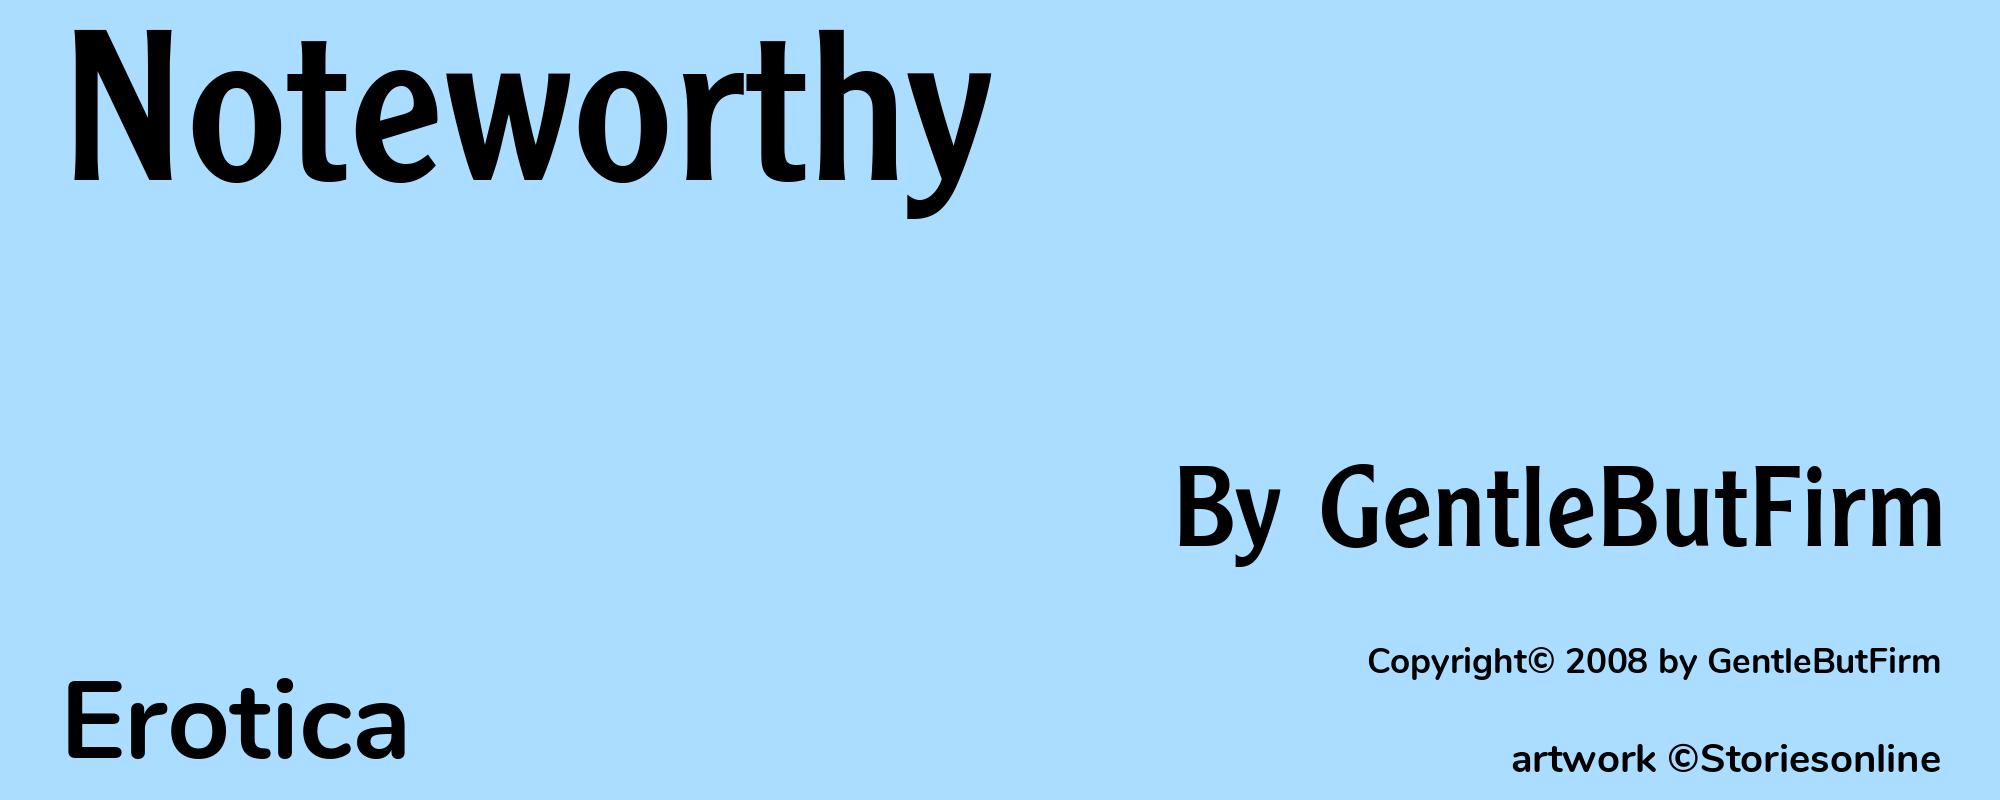 Noteworthy - Cover